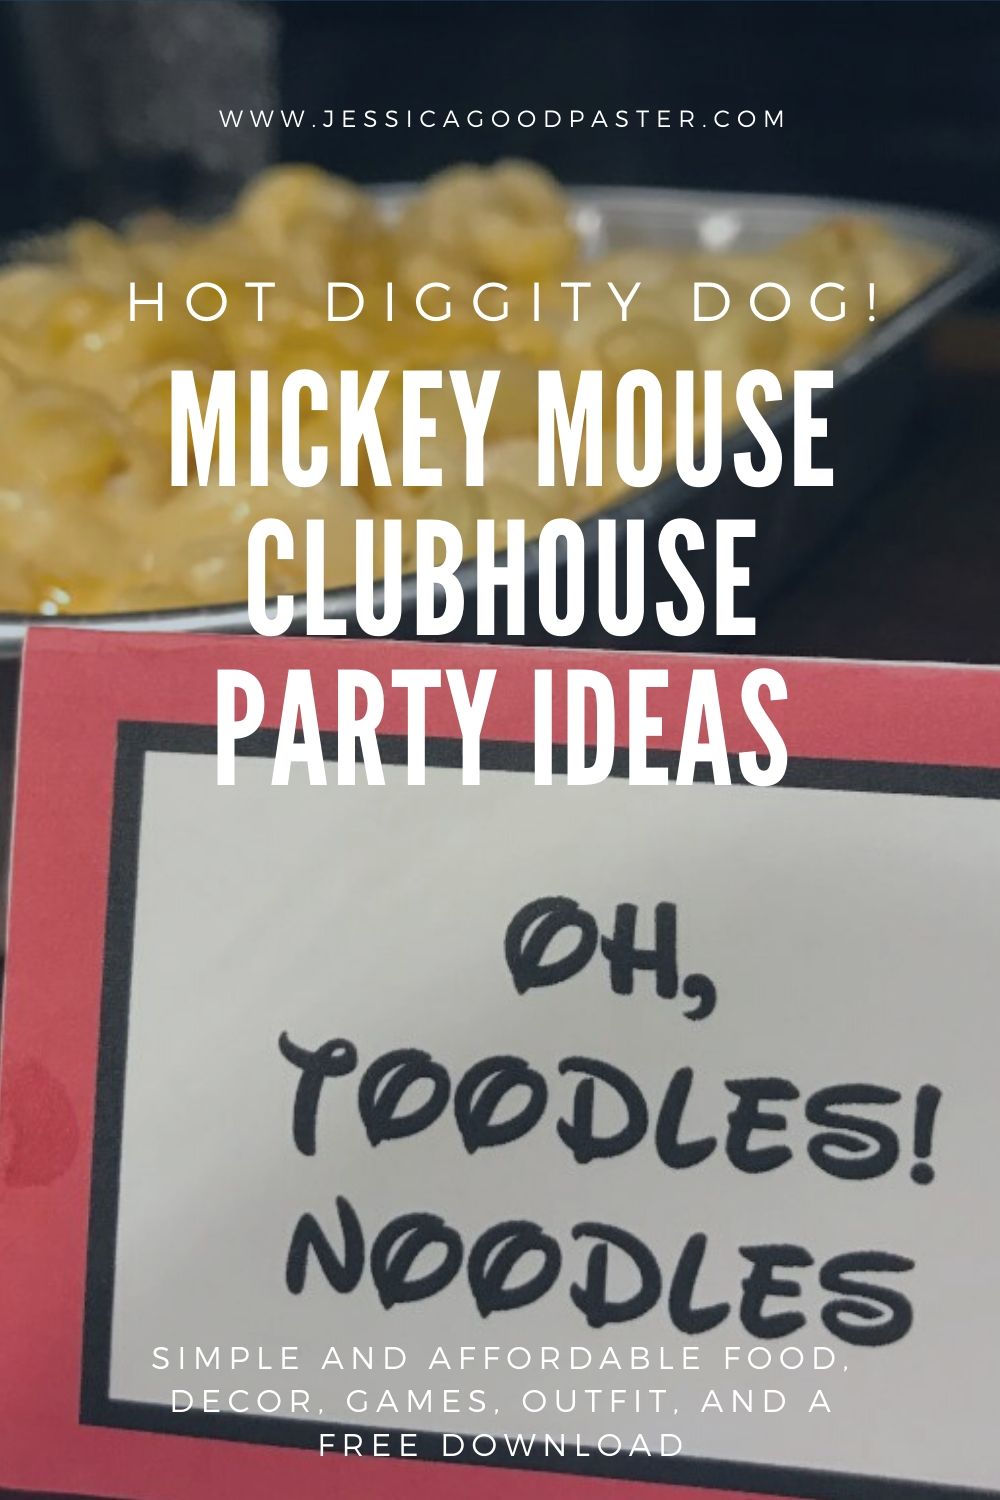 How to Host an Amazing Mickey Mouse Party on a Budget | Oh, Toodles Noodles (Macaroni and Cheese)! Tons of affordable options for Mickey or Minnie parties including food ideas, decorations, outfits, games, party supplies, and free printables! Your Mickey Mouse Clubhouse fan will have a great birthday ! #mickeyparty #mickeymouse #mickeymouseparty #minnieparty #birthday #mickeymouseclubhouse #mickeyprintables